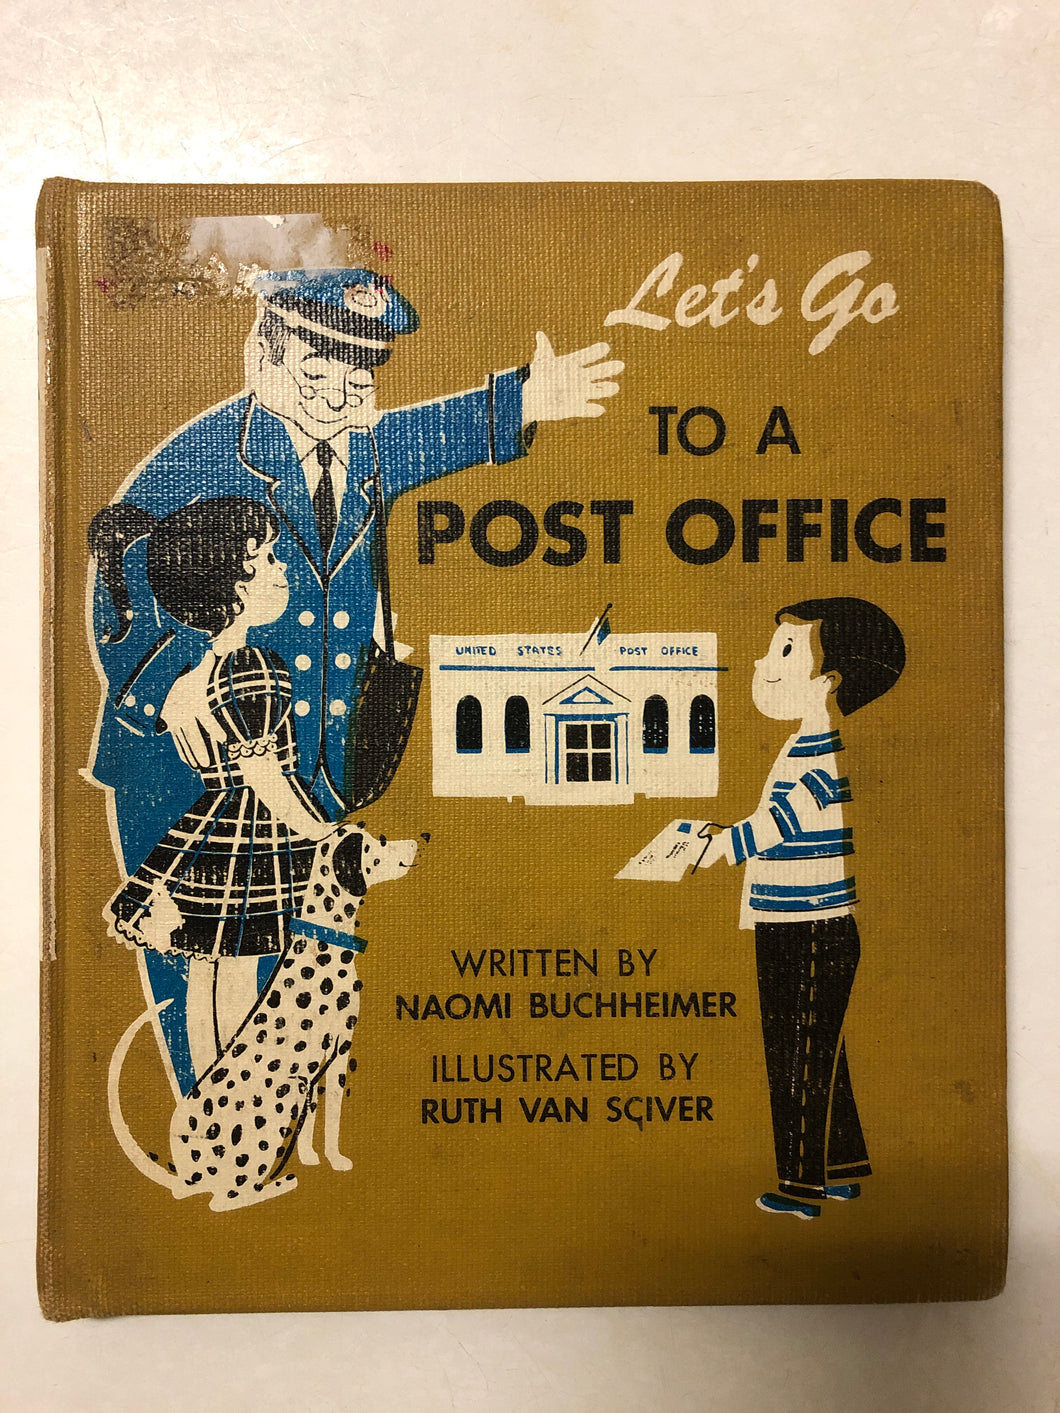 Let’s Go to a Post Office - Slick Cat Books 